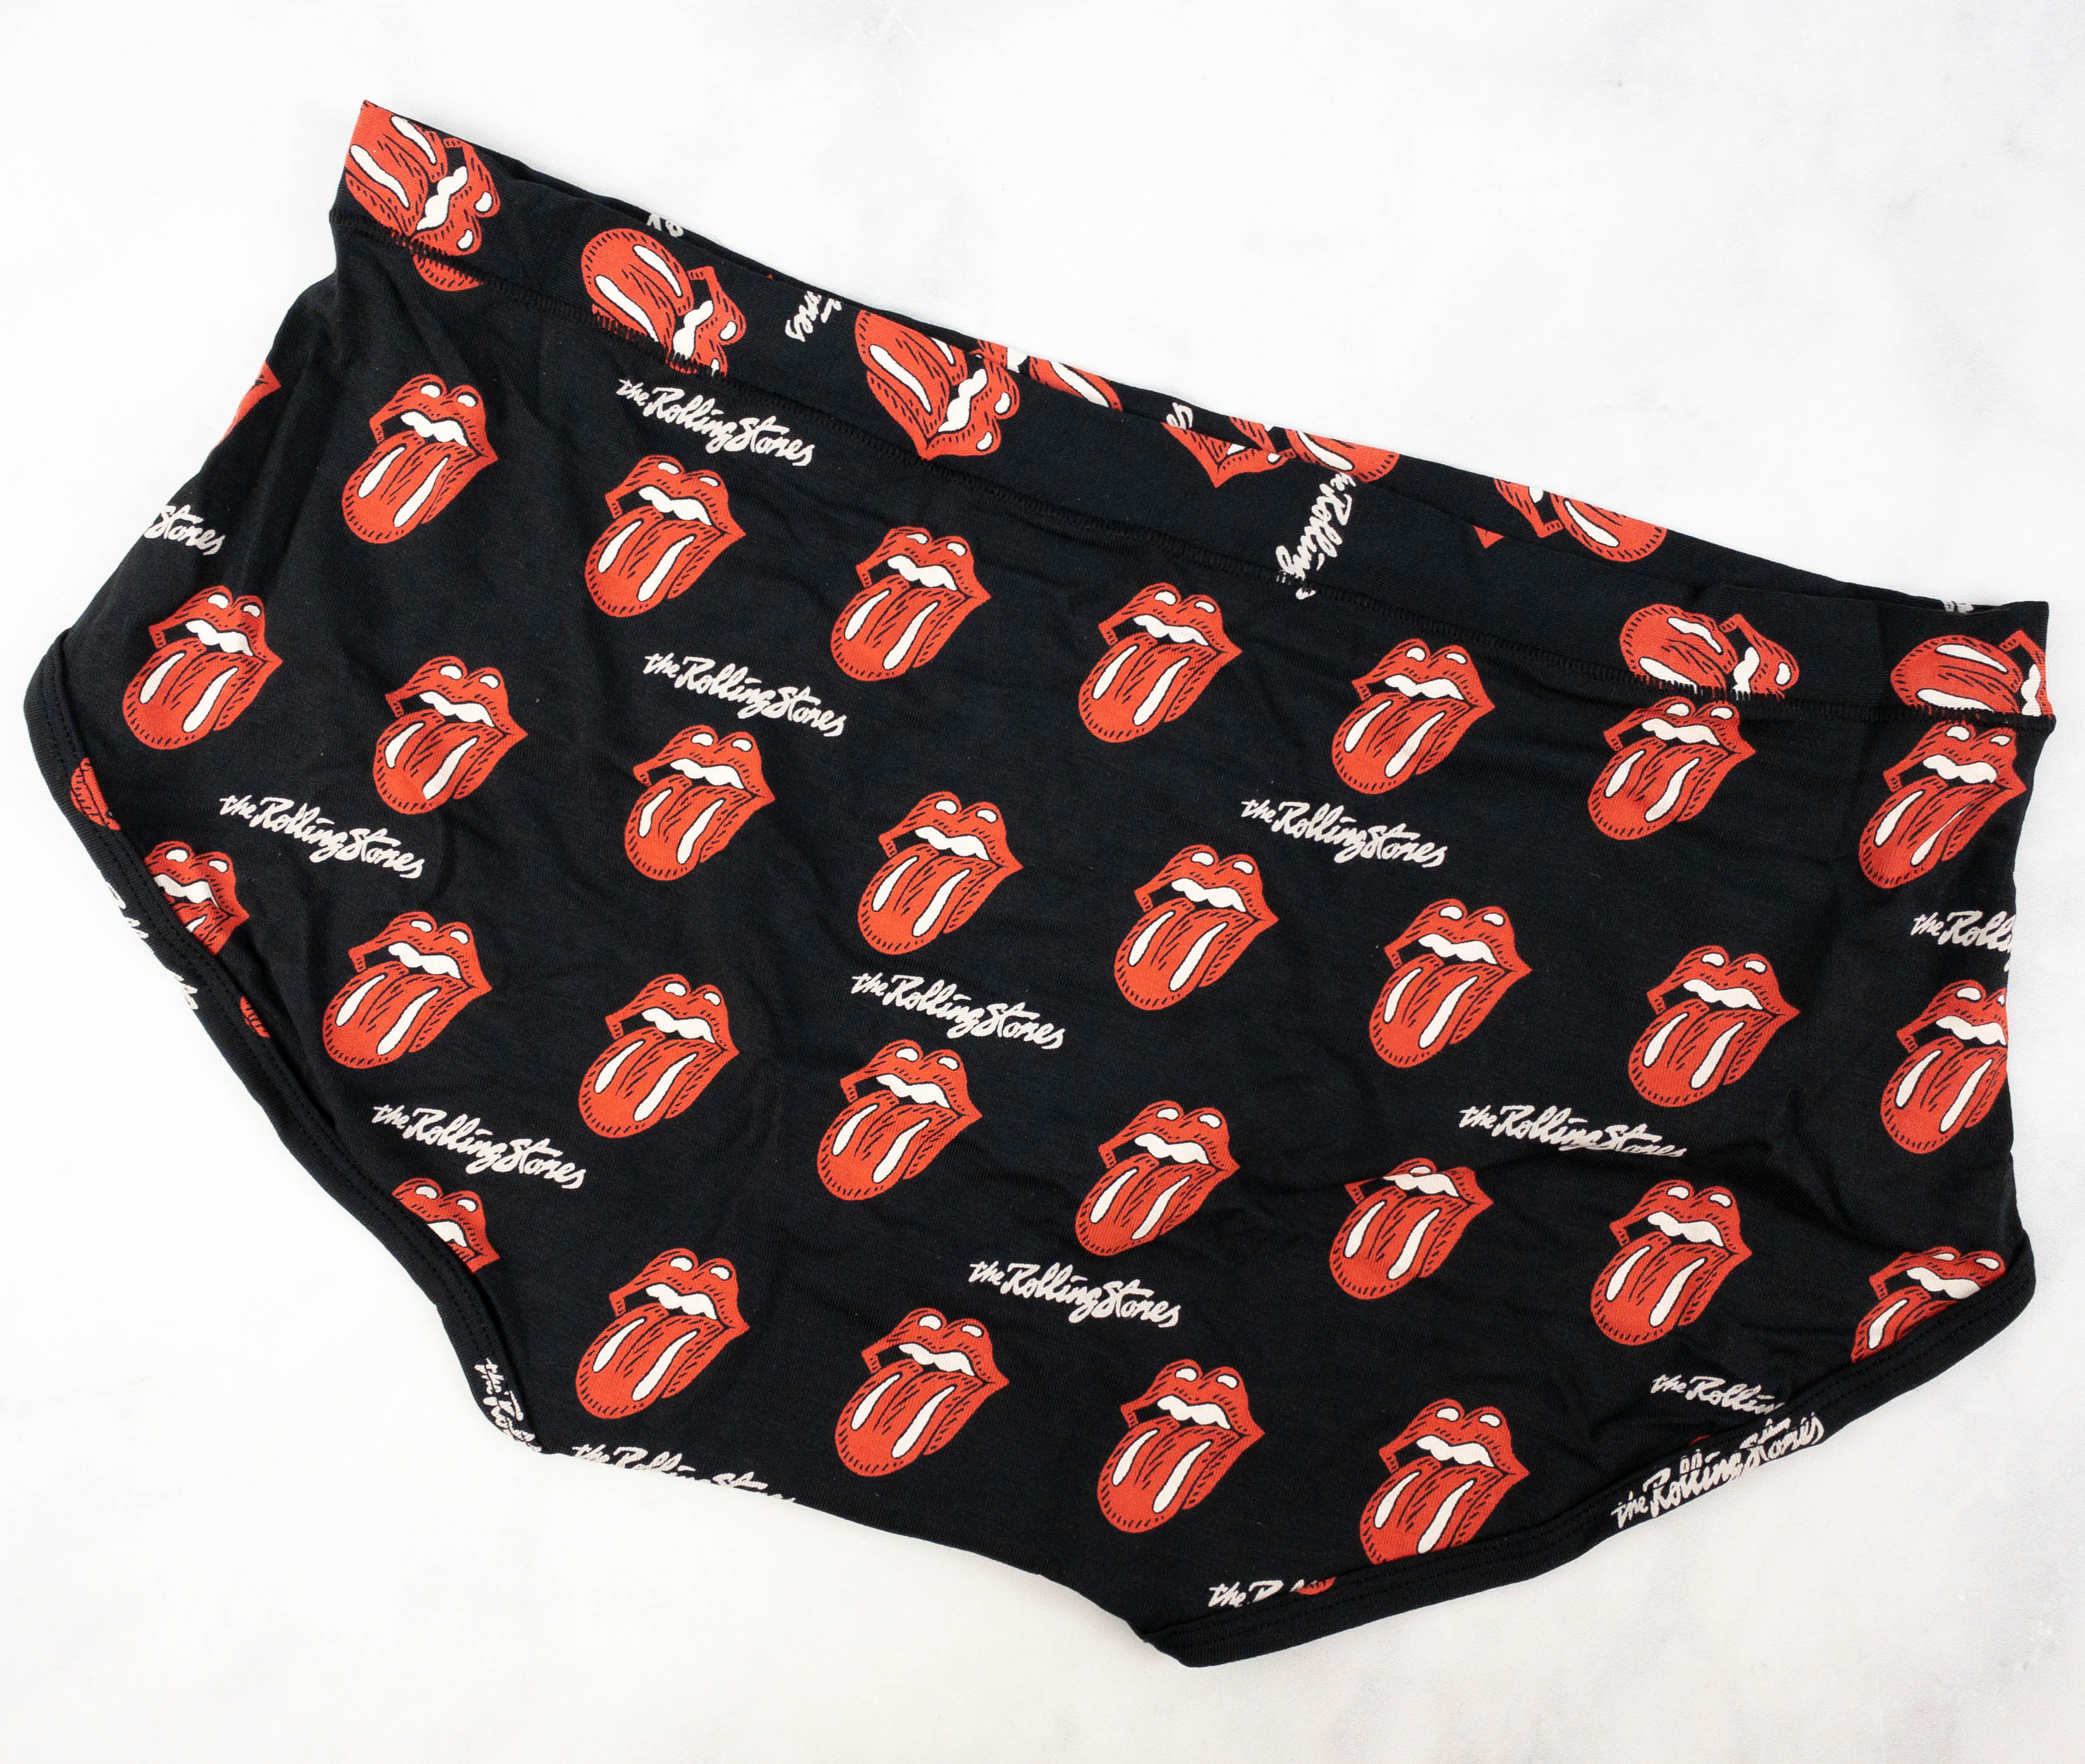 MeUndies Dropped a Collection of Rolling Stones Underwear